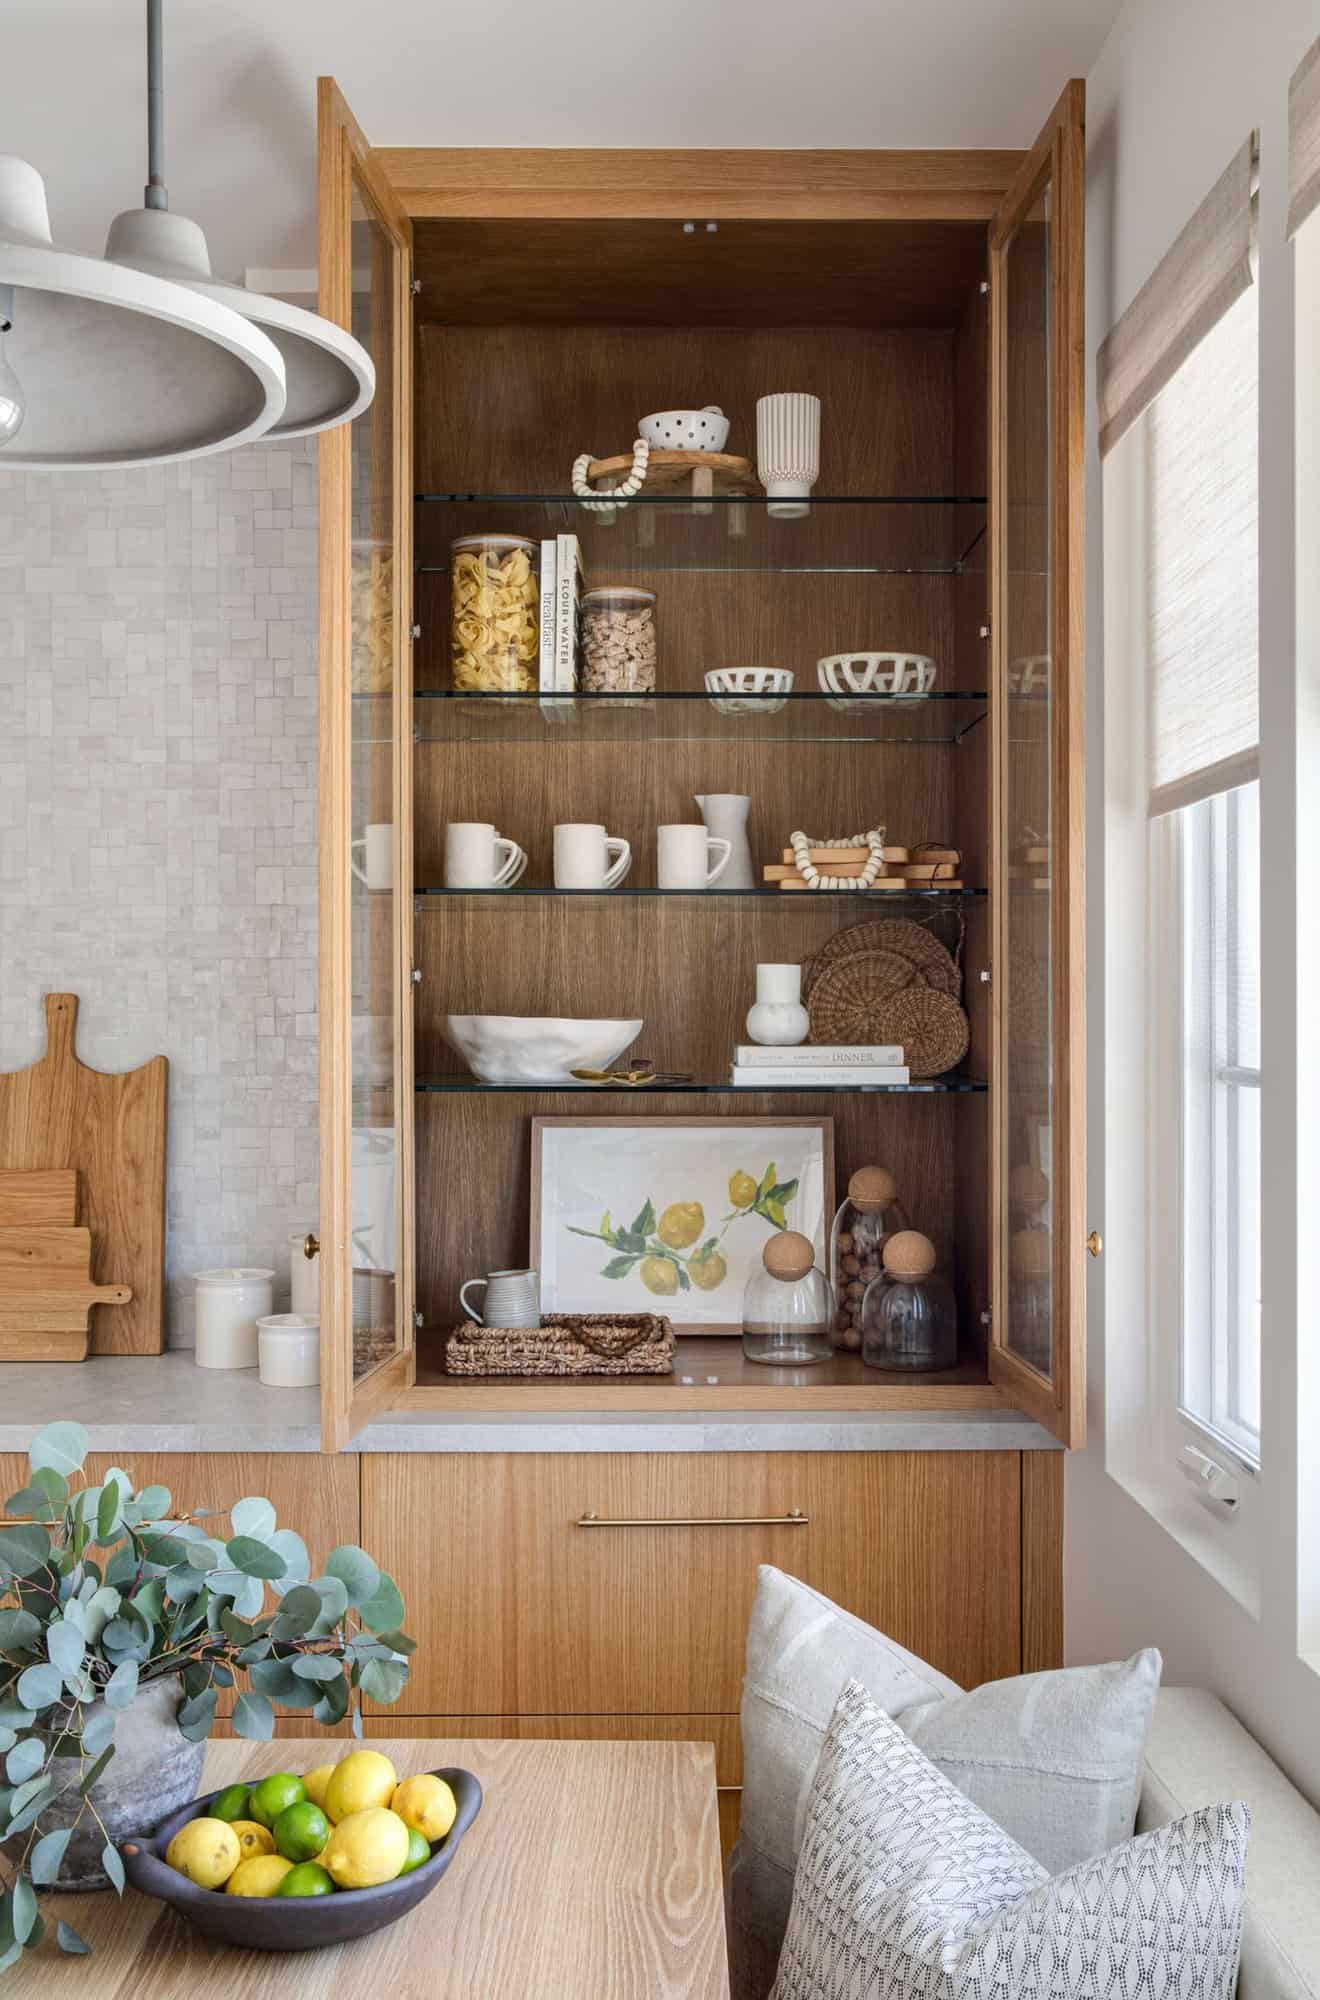 styling-your-shelves-to-perfection-kitchen-lindyegalloway.jpeg